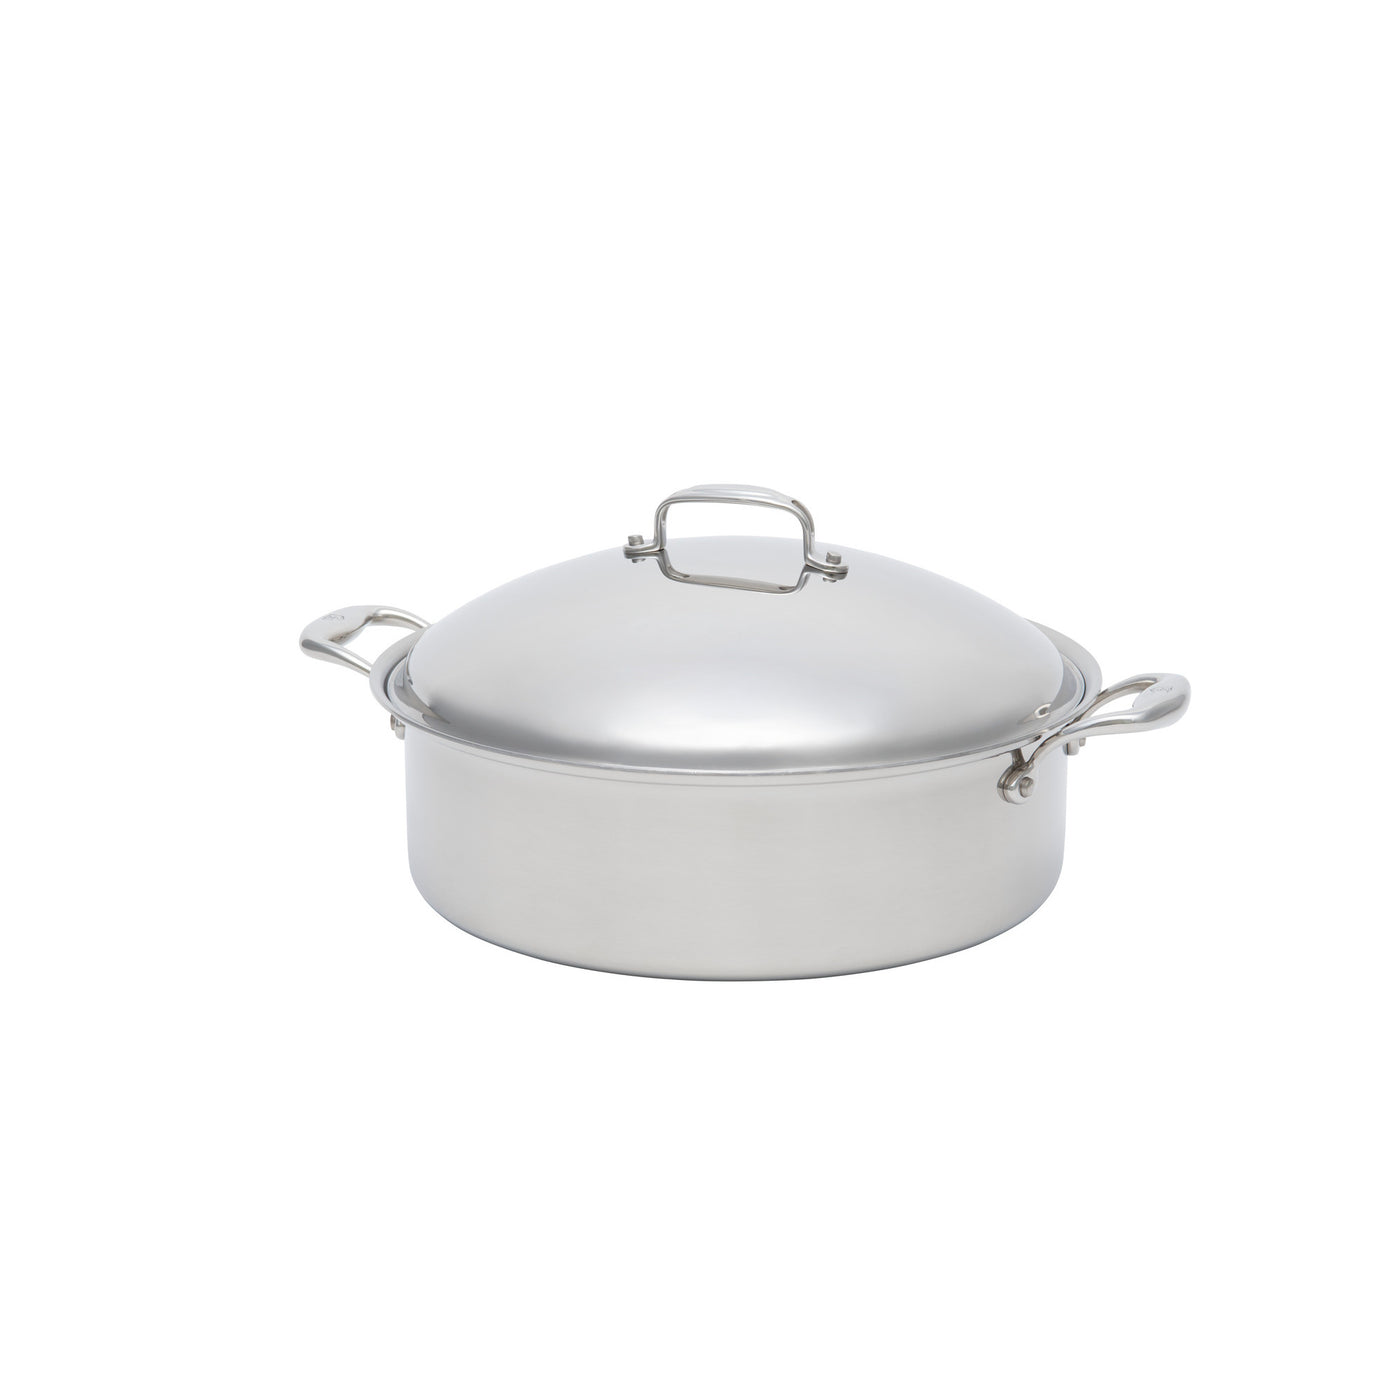 Paderno Stainless Steel 4 Quart Rondeau Pot